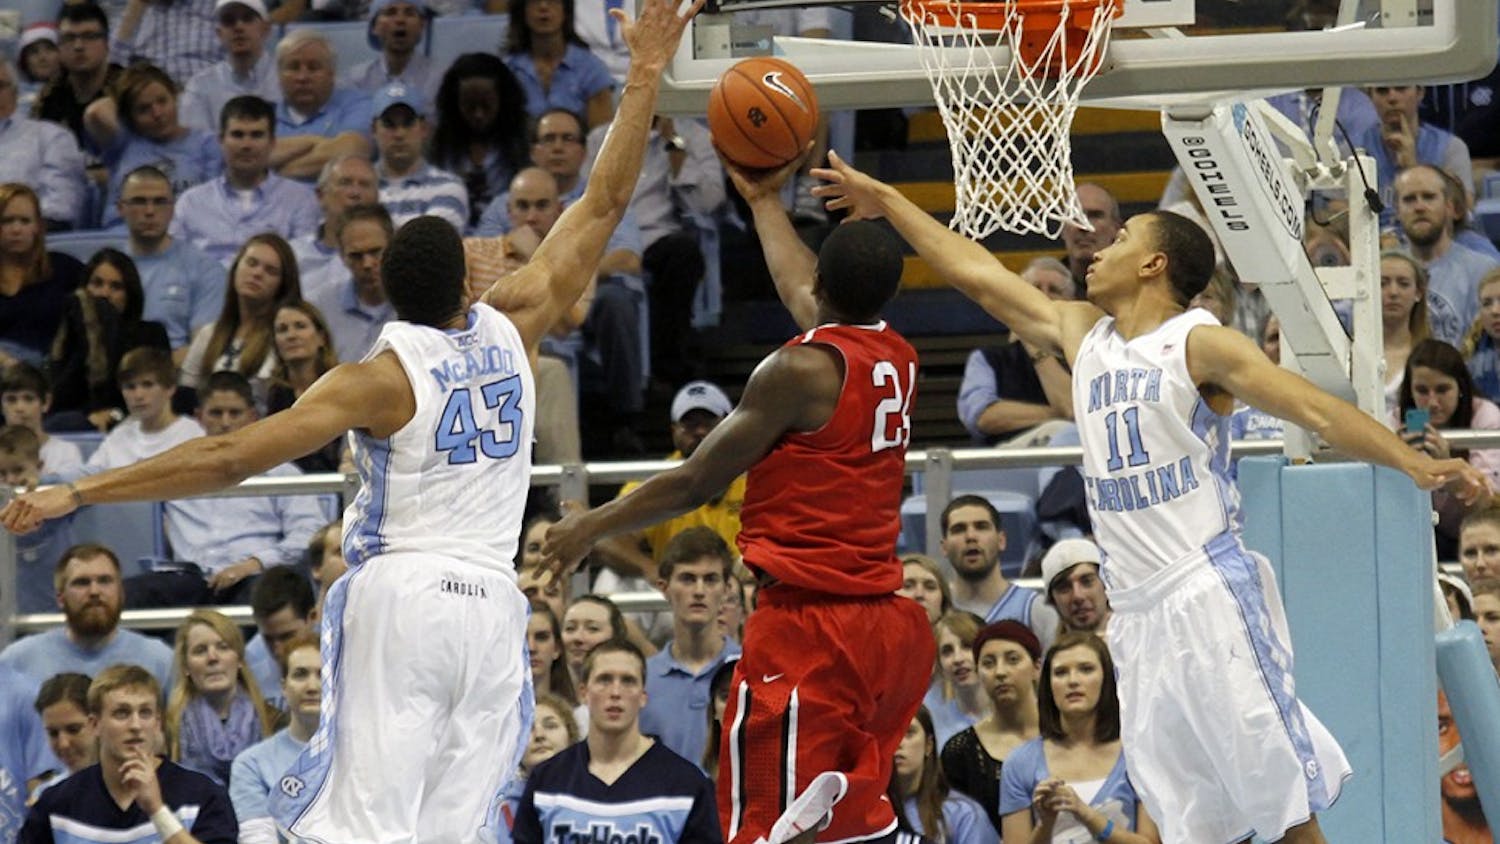 UNC Men's Basketball defeated Davidson on Saturday night in Chapel Hill, NC